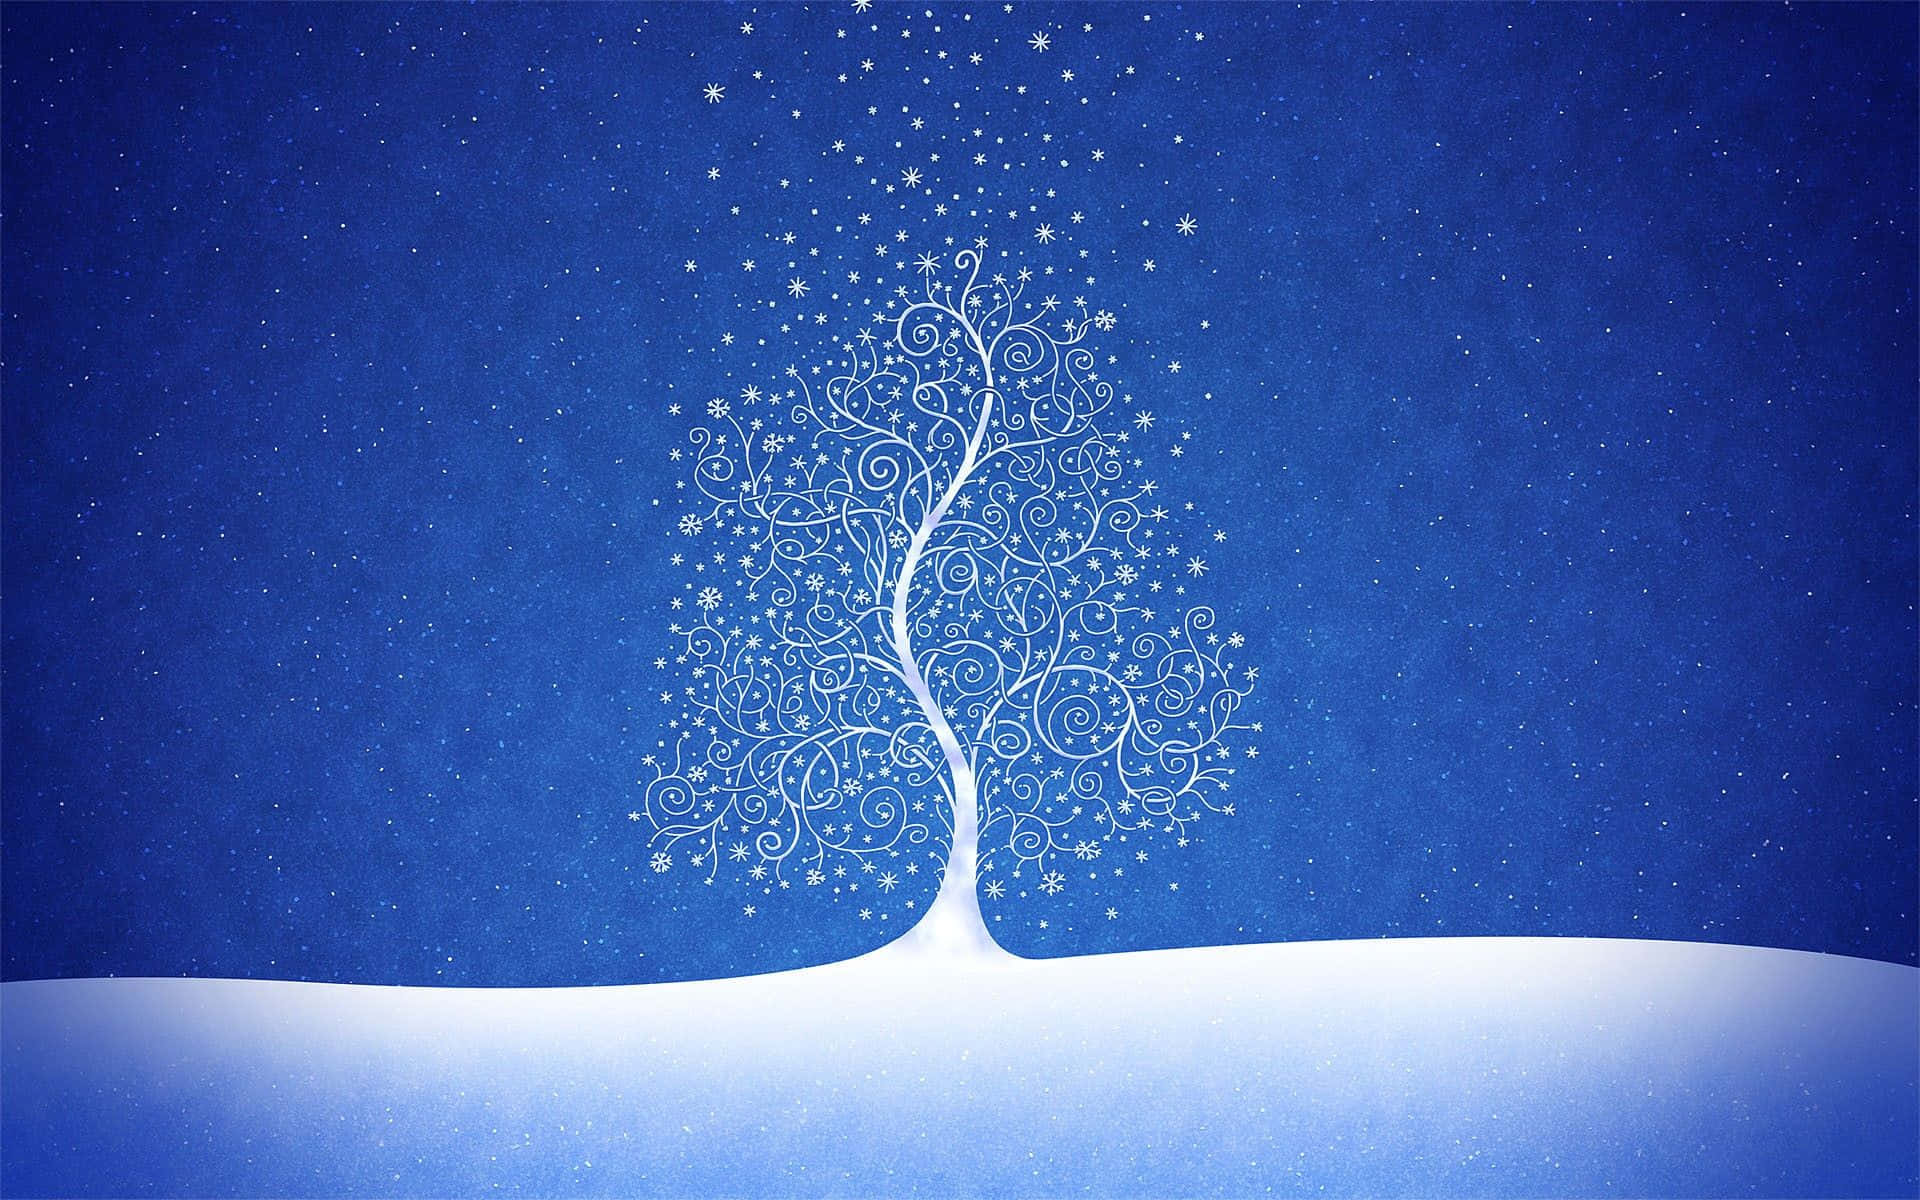 A Christmas Tree With Snowflakes On A Blue Background